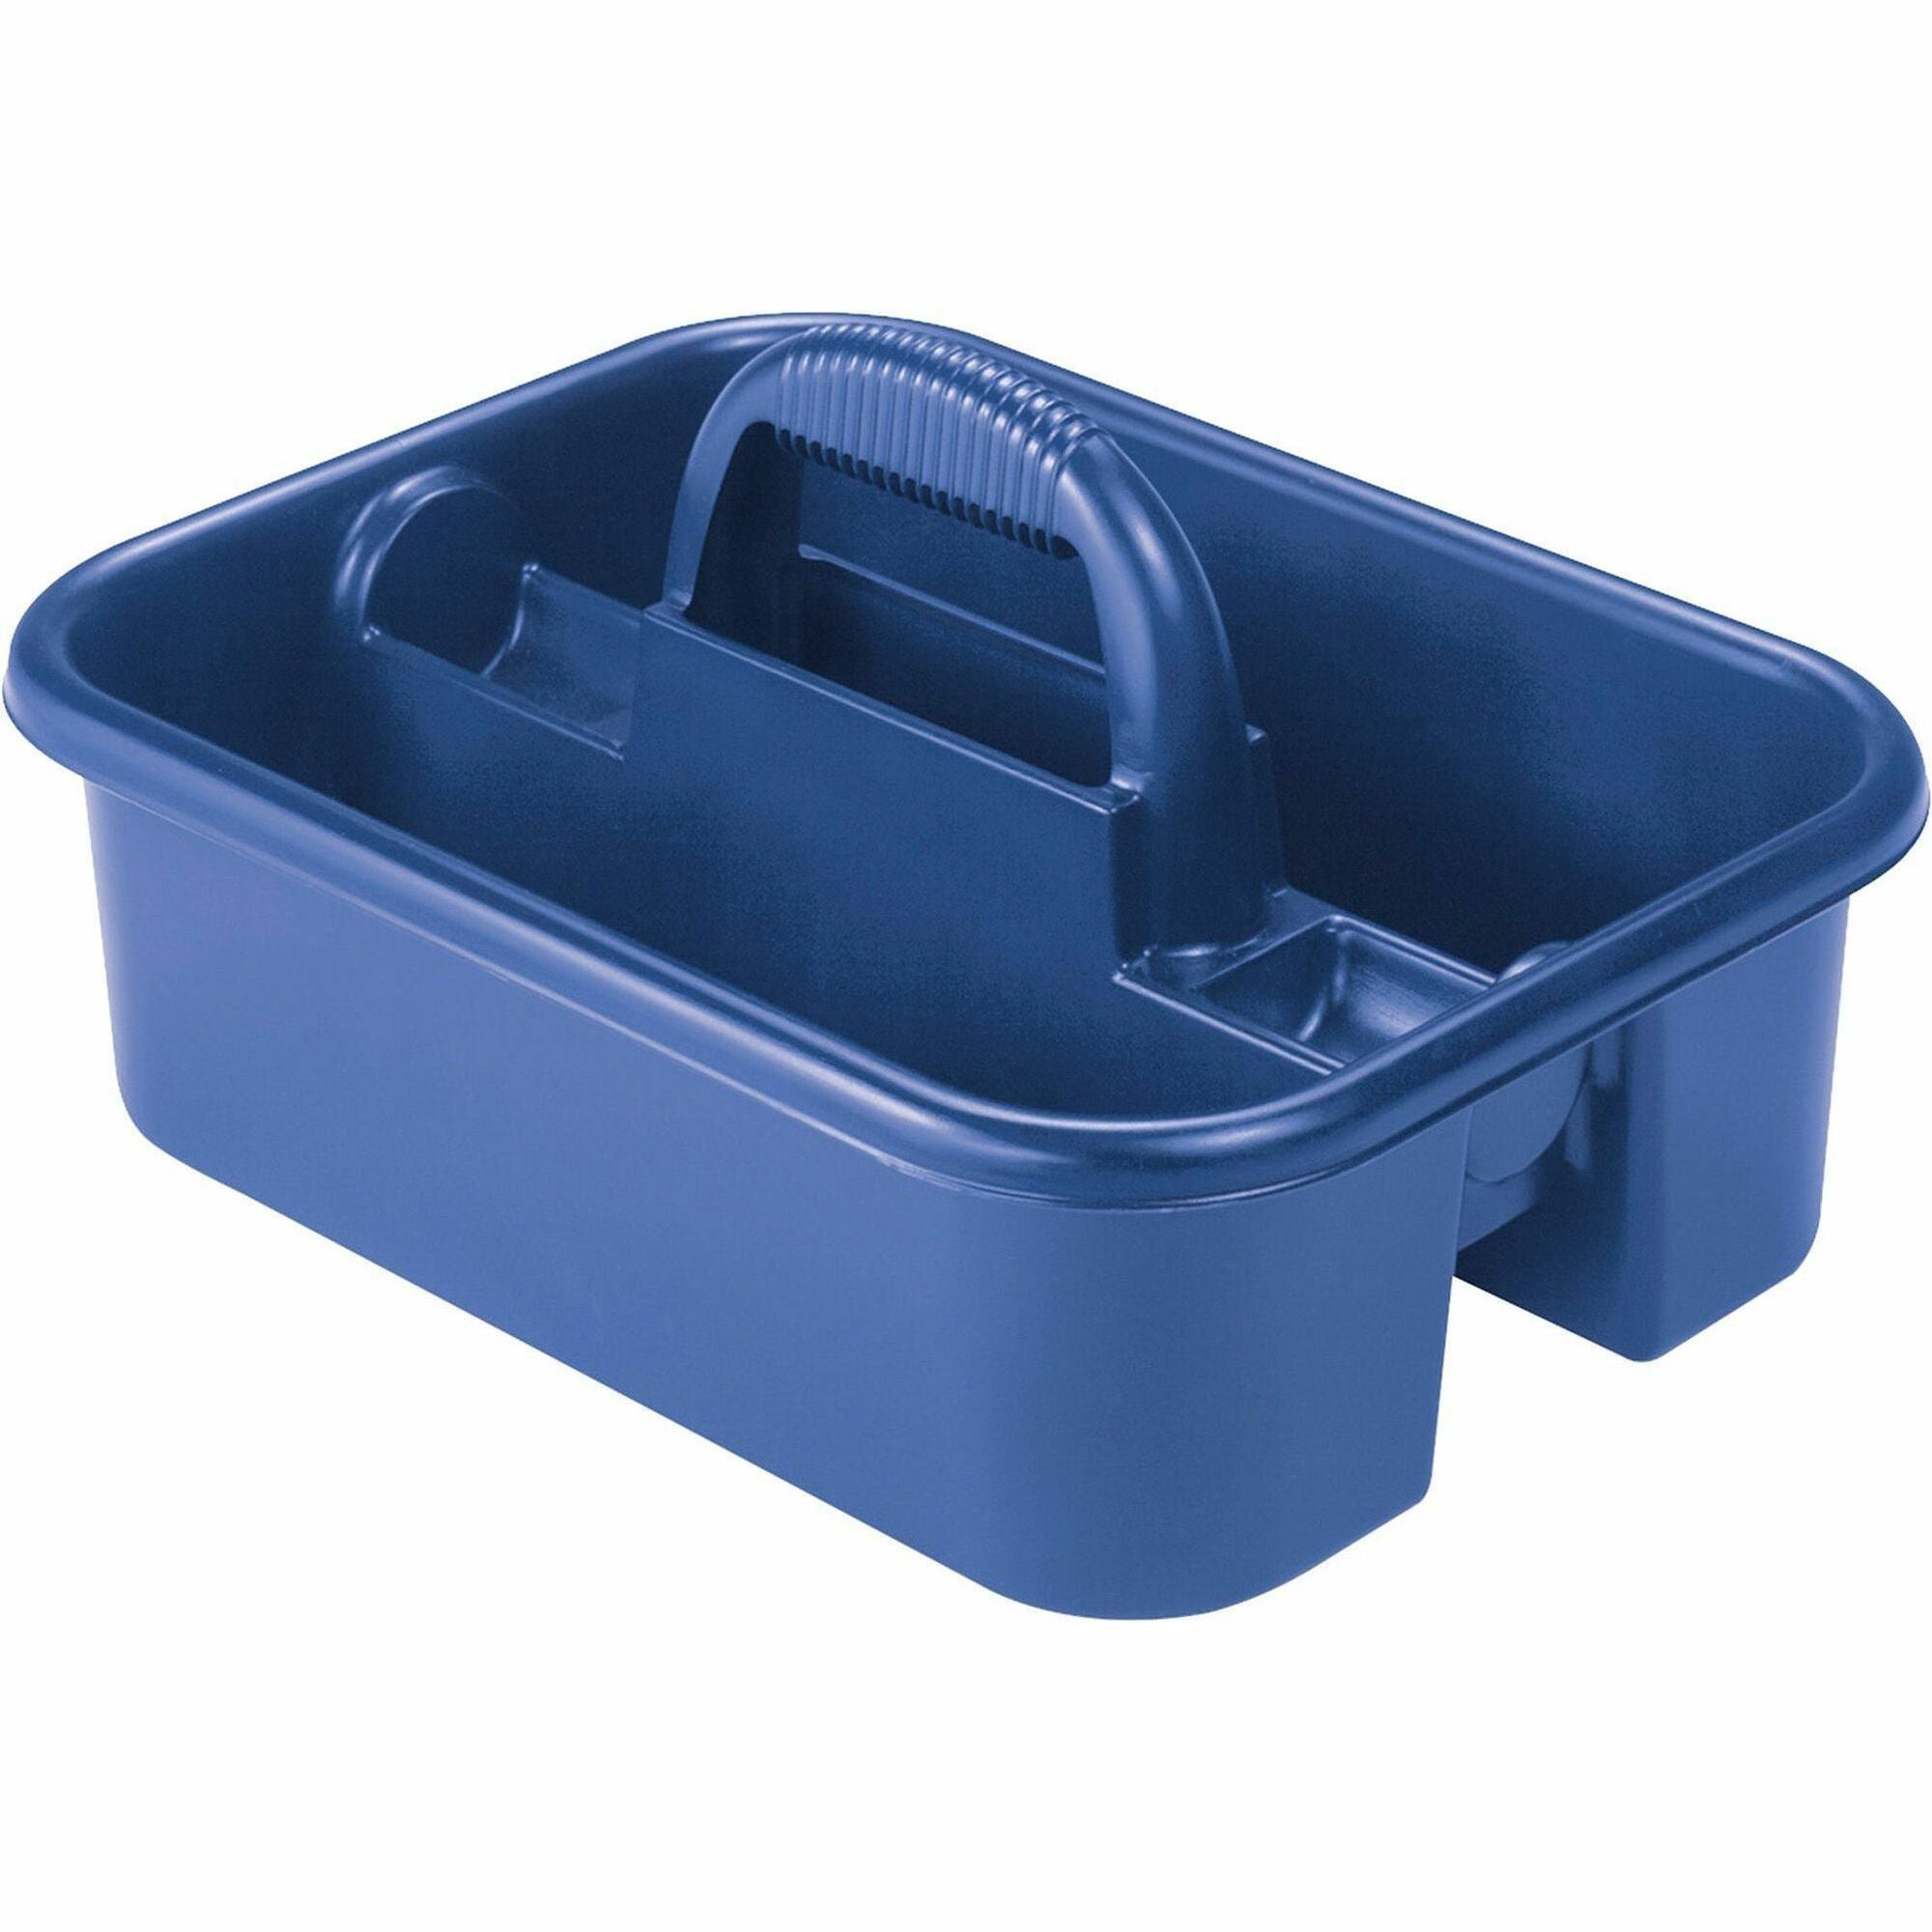 Akro-Mils Handheld Tote Caddy - External Dimensions: 13.8" Width x 18.4" Depth x 9" Height - Polymer - Blue - For Tool - 1 Each - 